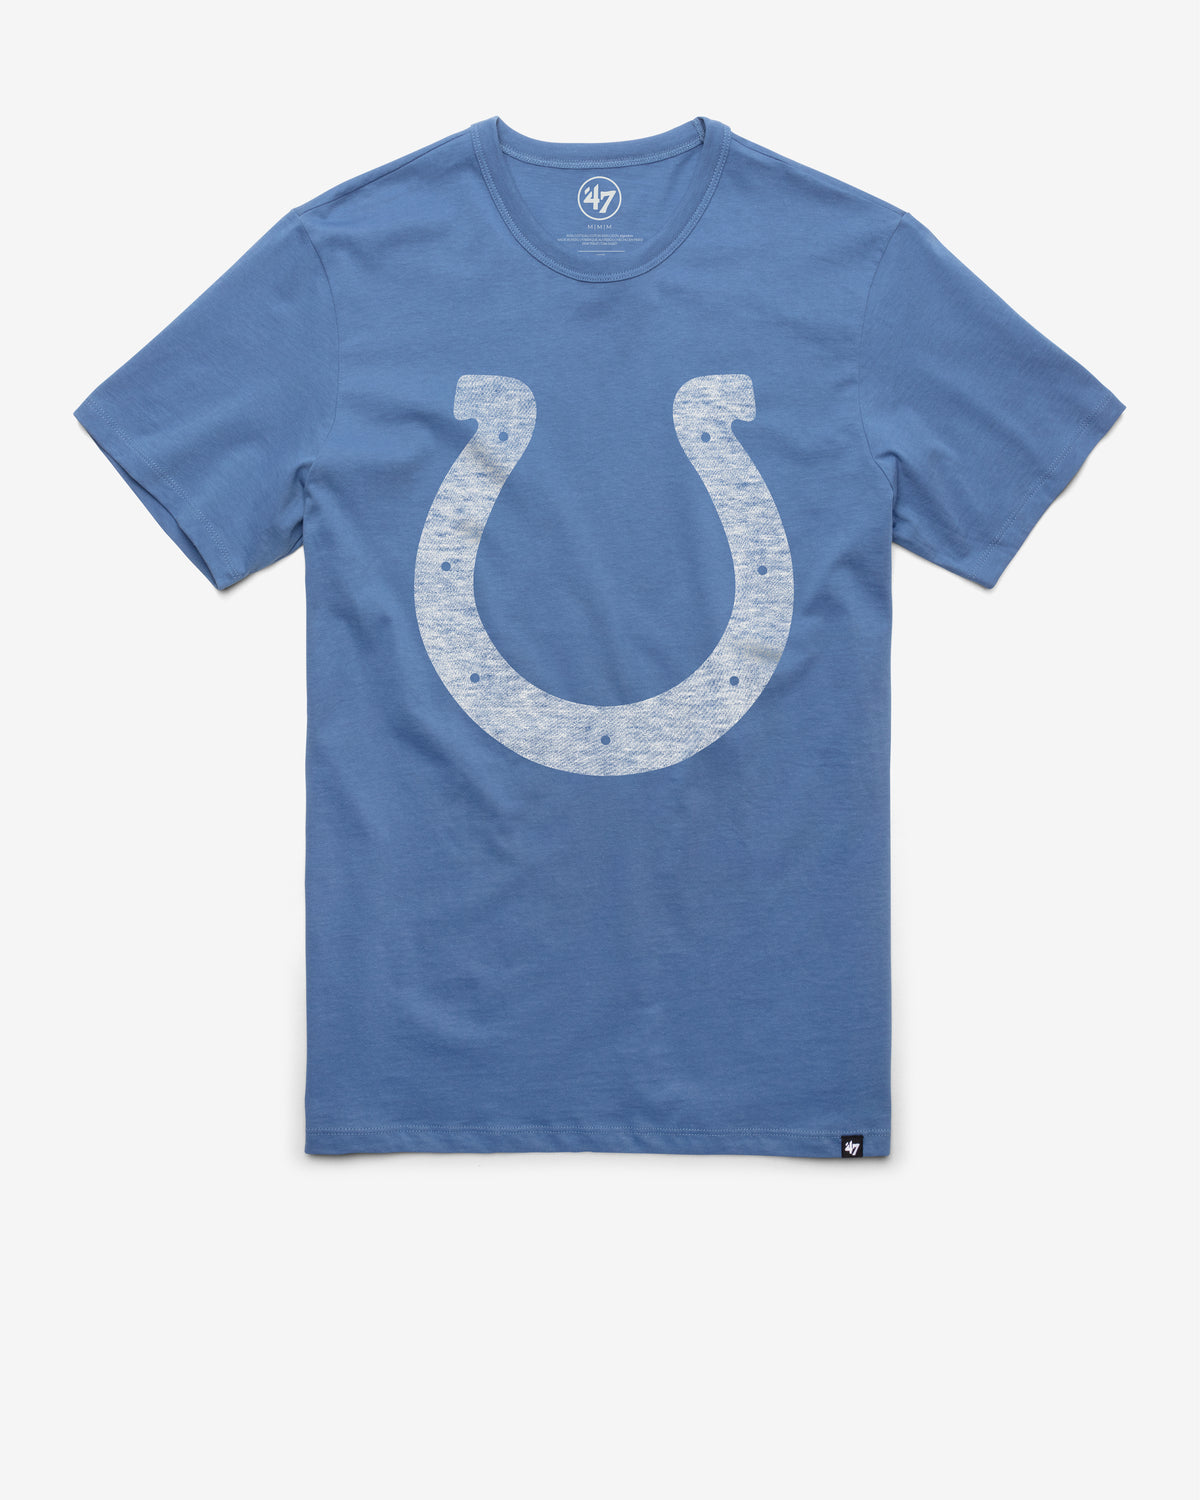 INDIANAPOLIS COLTS PREMIER '47 FRANKLIN TEE